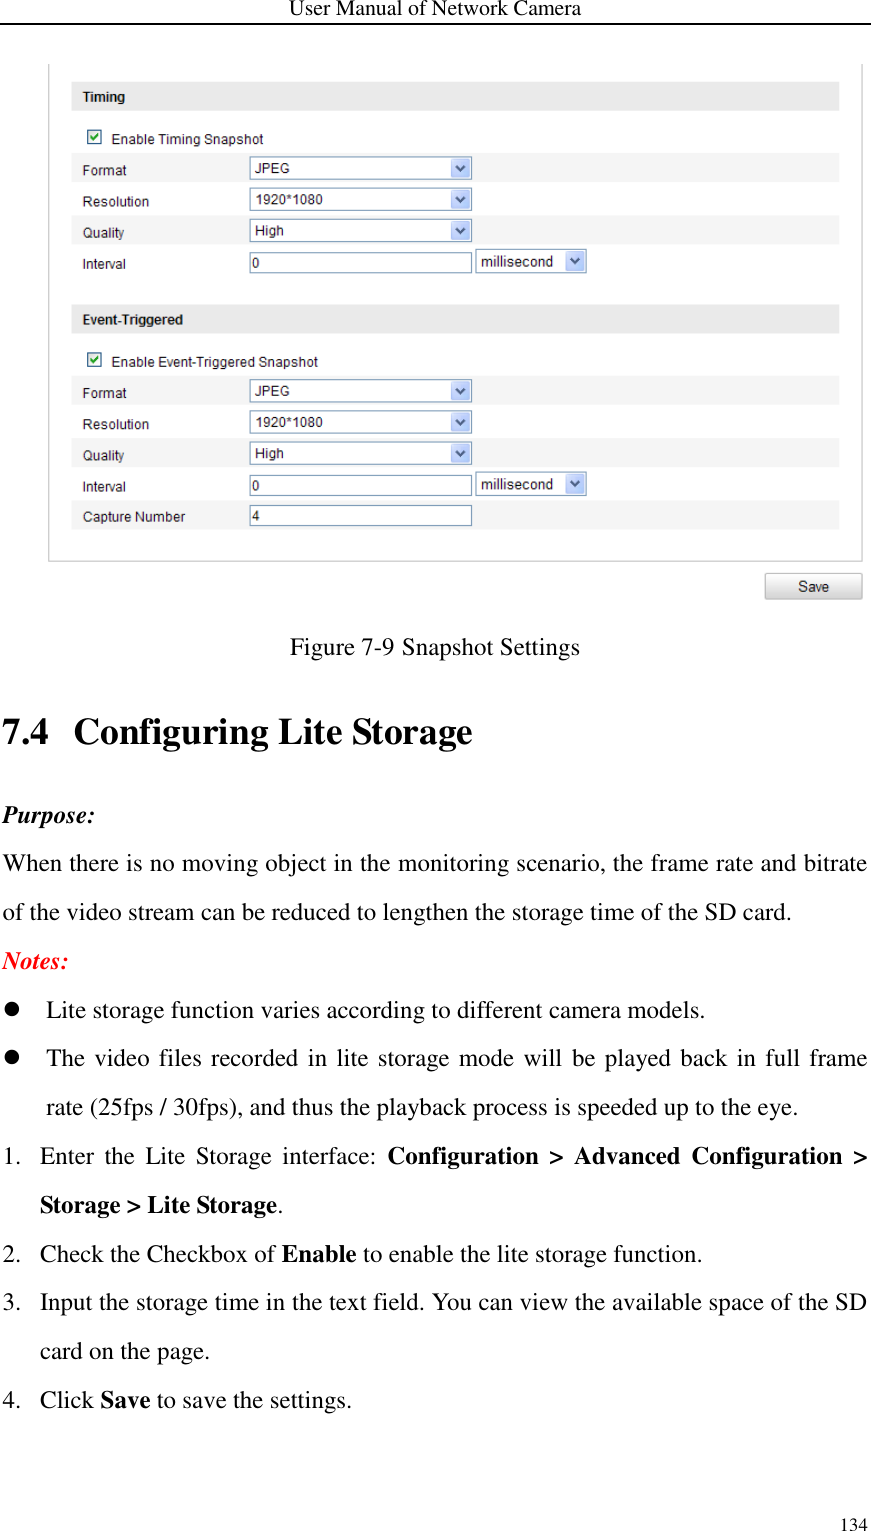 User Manual of Network Camera 134   Figure 7-9 Snapshot Settings 7.4 Configuring Lite Storage Purpose: When there is no moving object in the monitoring scenario, the frame rate and bitrate of the video stream can be reduced to lengthen the storage time of the SD card.   Notes:    Lite storage function varies according to different camera models.  The video files recorded in lite storage mode will  be played back in full frame rate (25fps / 30fps), and thus the playback process is speeded up to the eye. 1. Enter  the  Lite  Storage  interface:  Configuration &gt;  Advanced  Configuration  &gt; Storage &gt; Lite Storage. 2. Check the Checkbox of Enable to enable the lite storage function. 3. Input the storage time in the text field. You can view the available space of the SD card on the page. 4. Click Save to save the settings.  